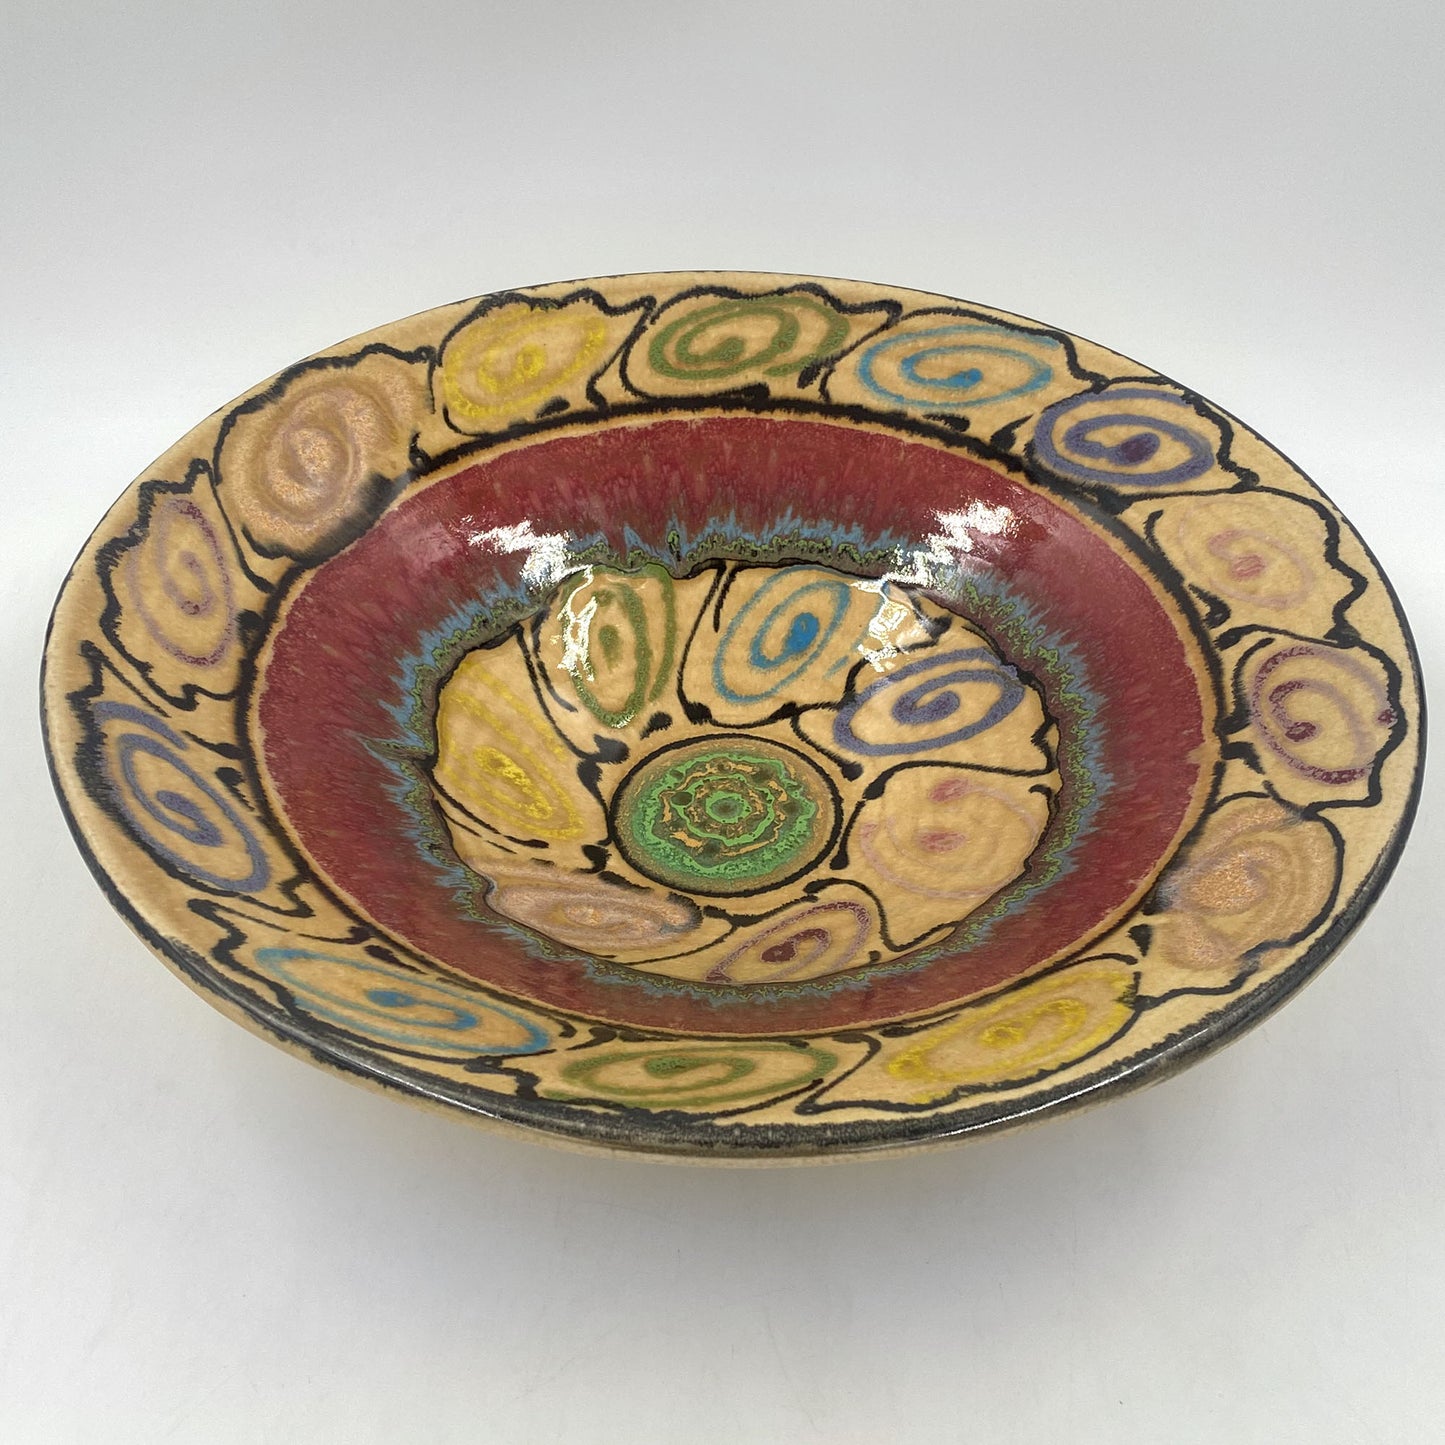 Detroiter Conical Bowl